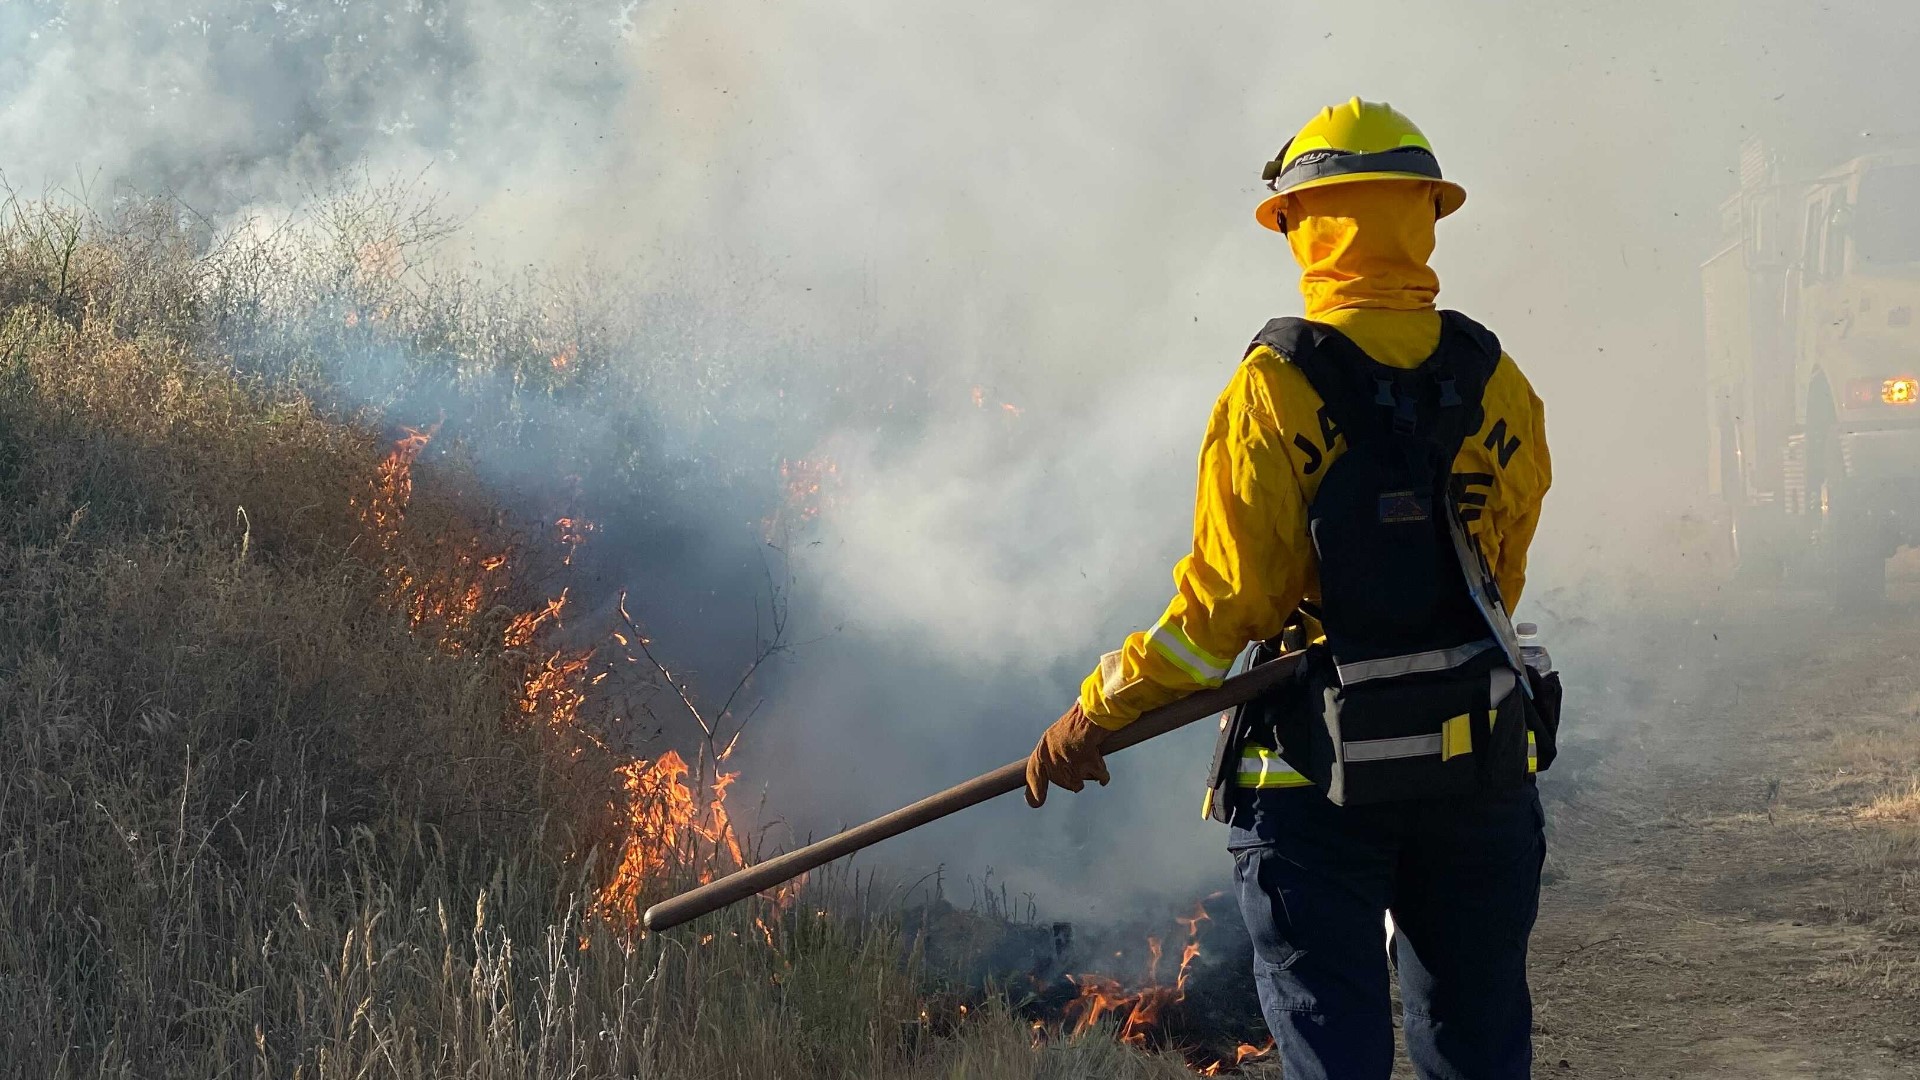 Prescribed burns are important tools in clearing brush and training firefighters, officials say.